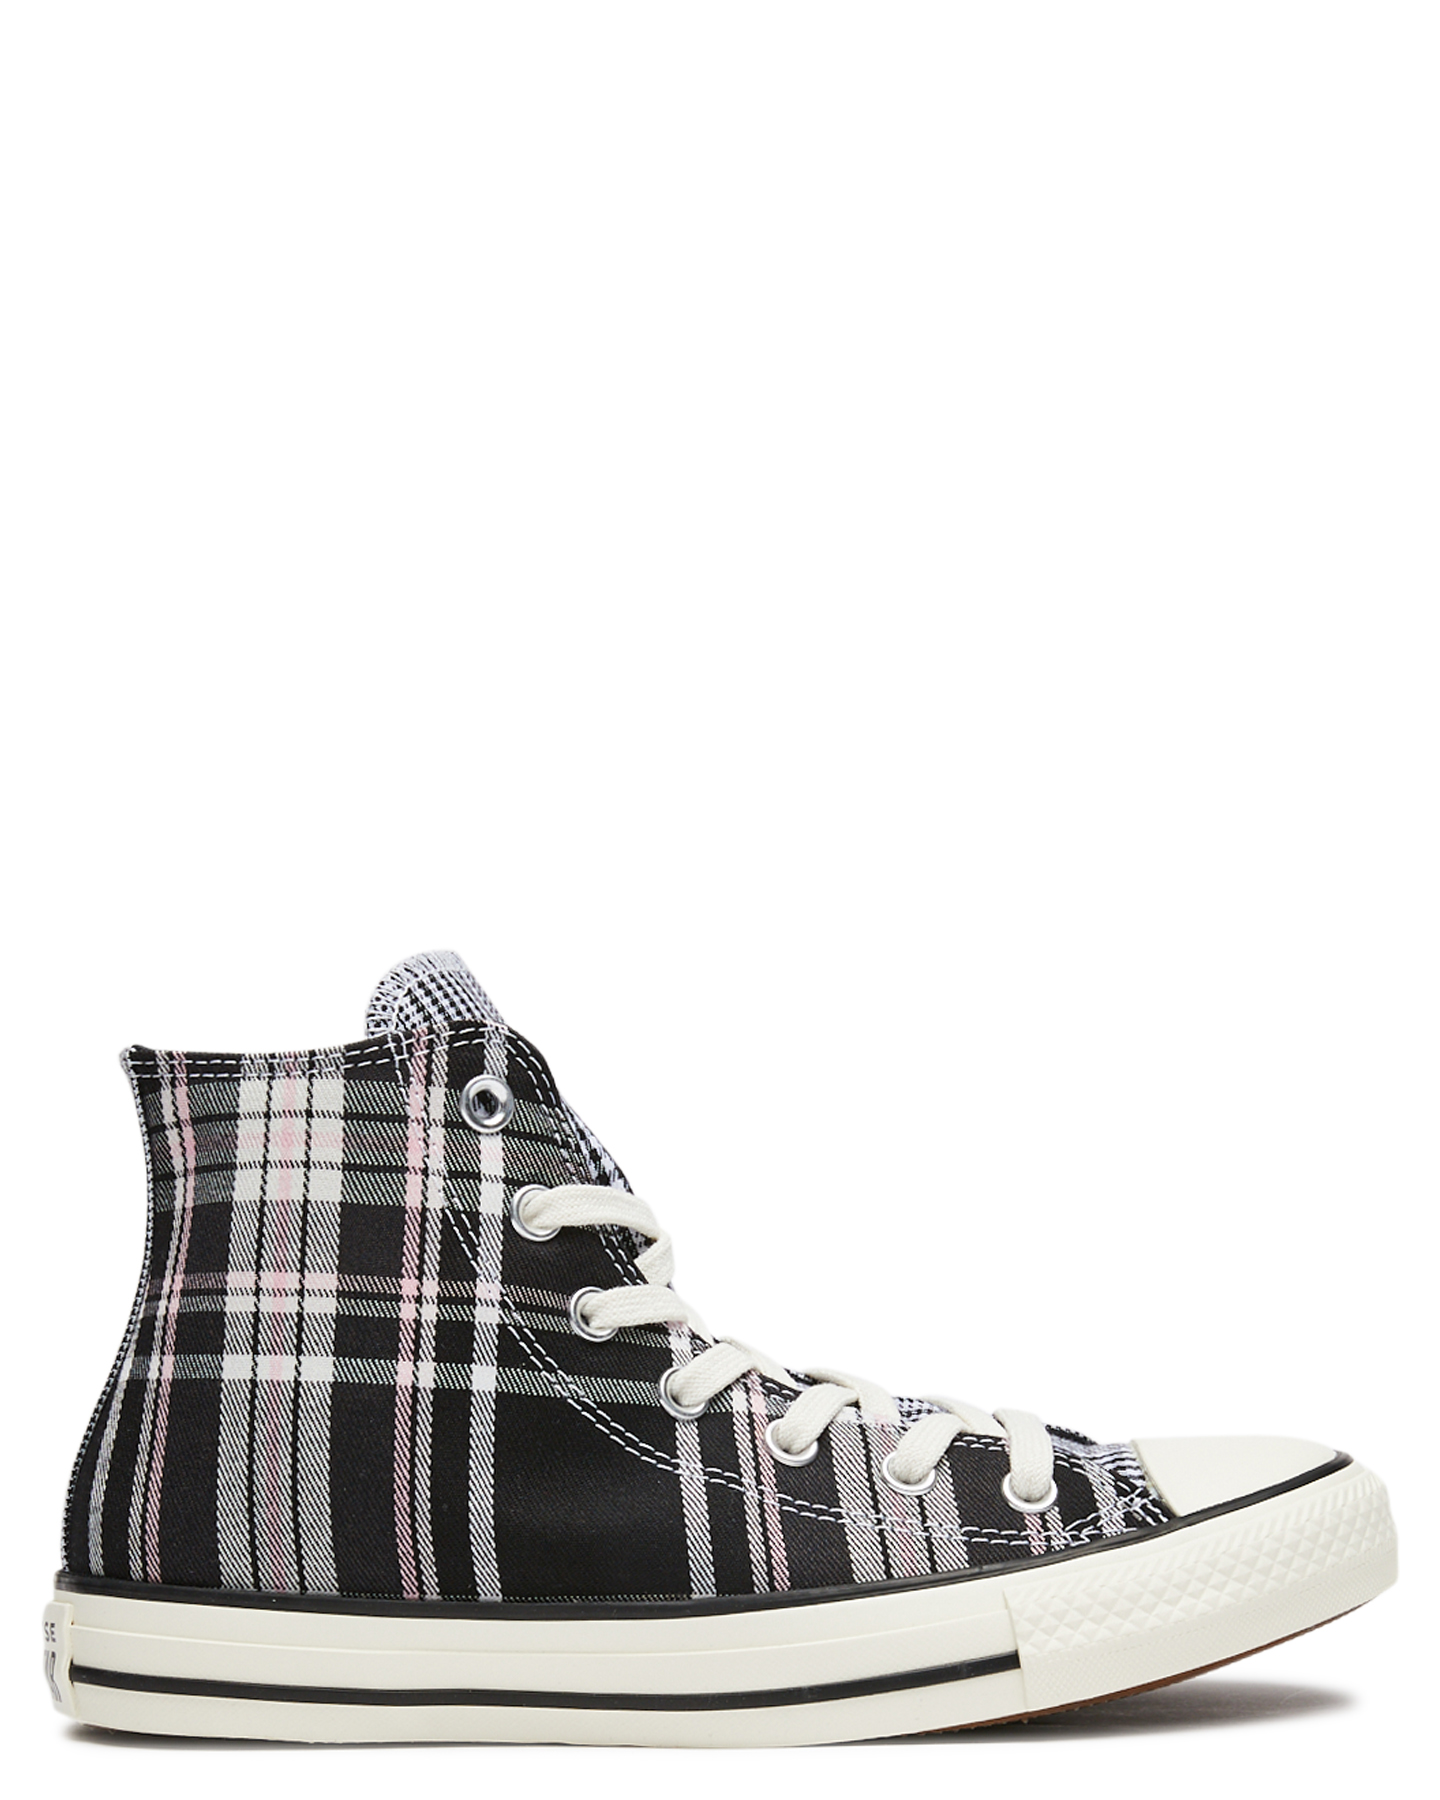 womens plaid converse sneakers